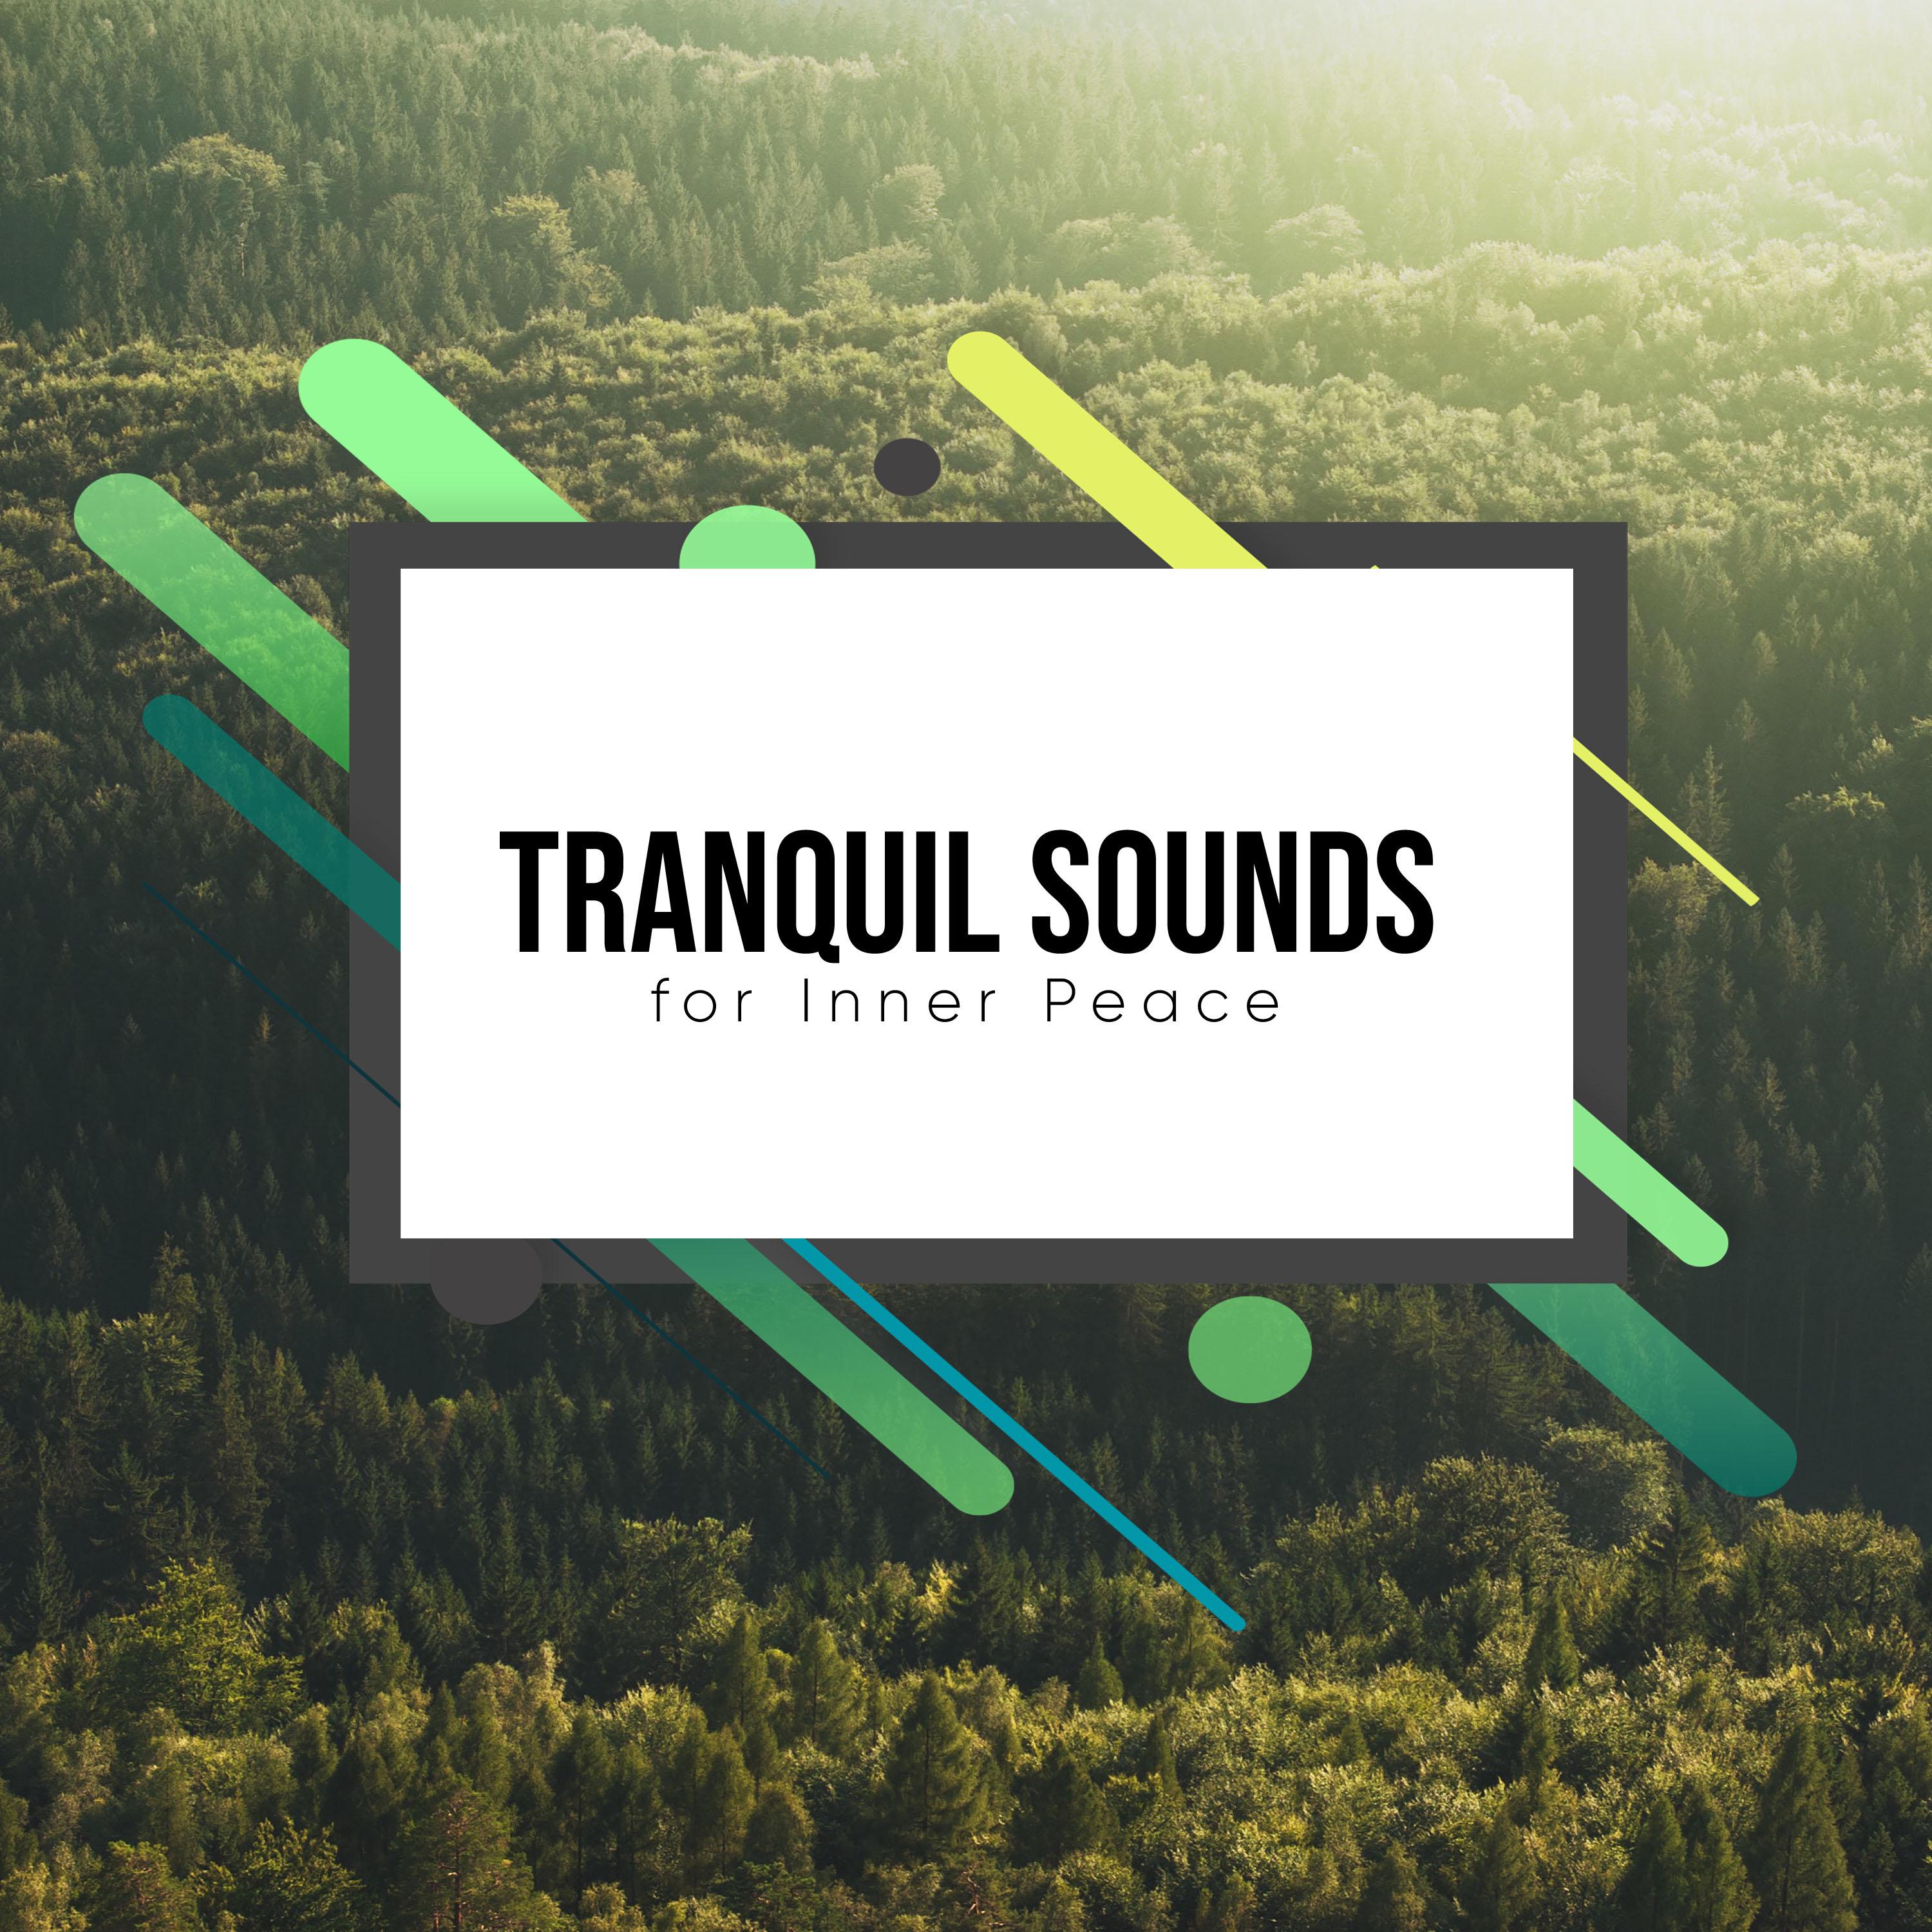 #20 Tranquil Sounds for Inner Peace